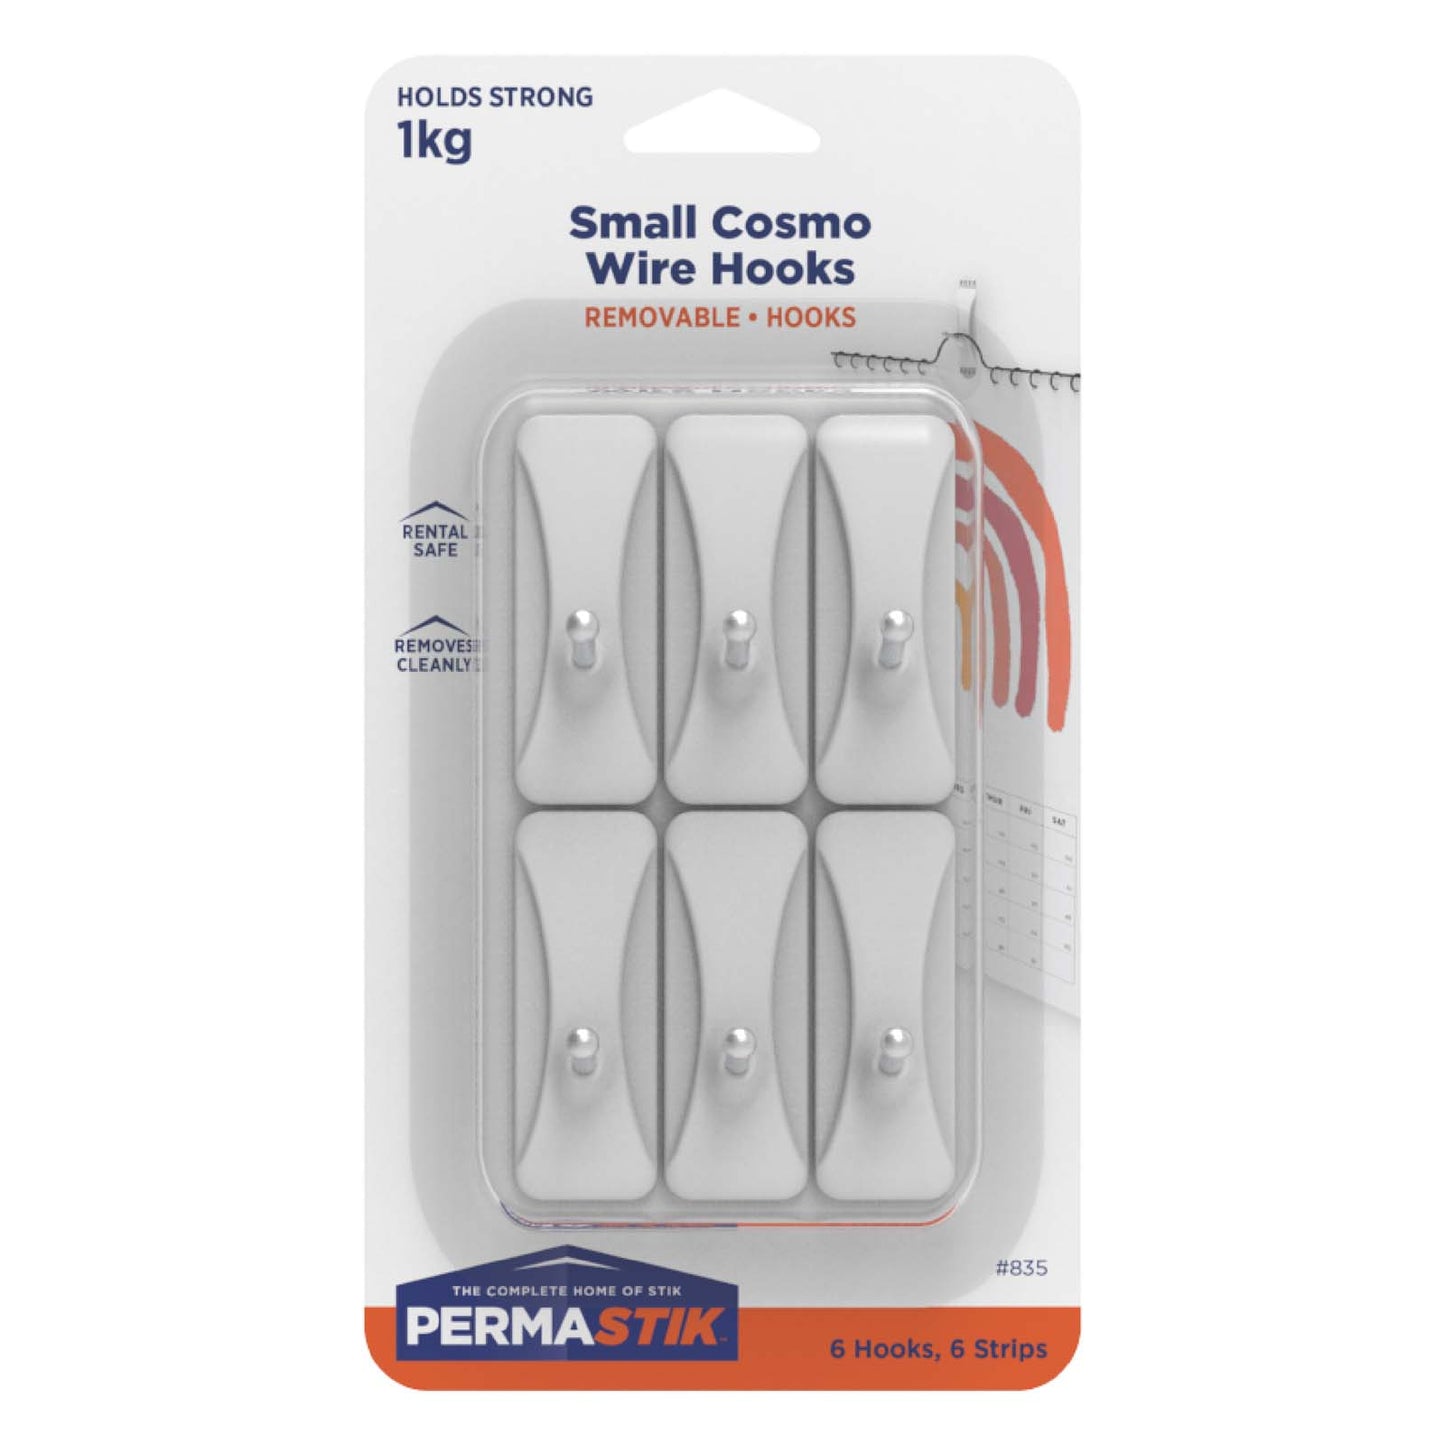 Small Cosmo Wire Hooks - 6 Pack